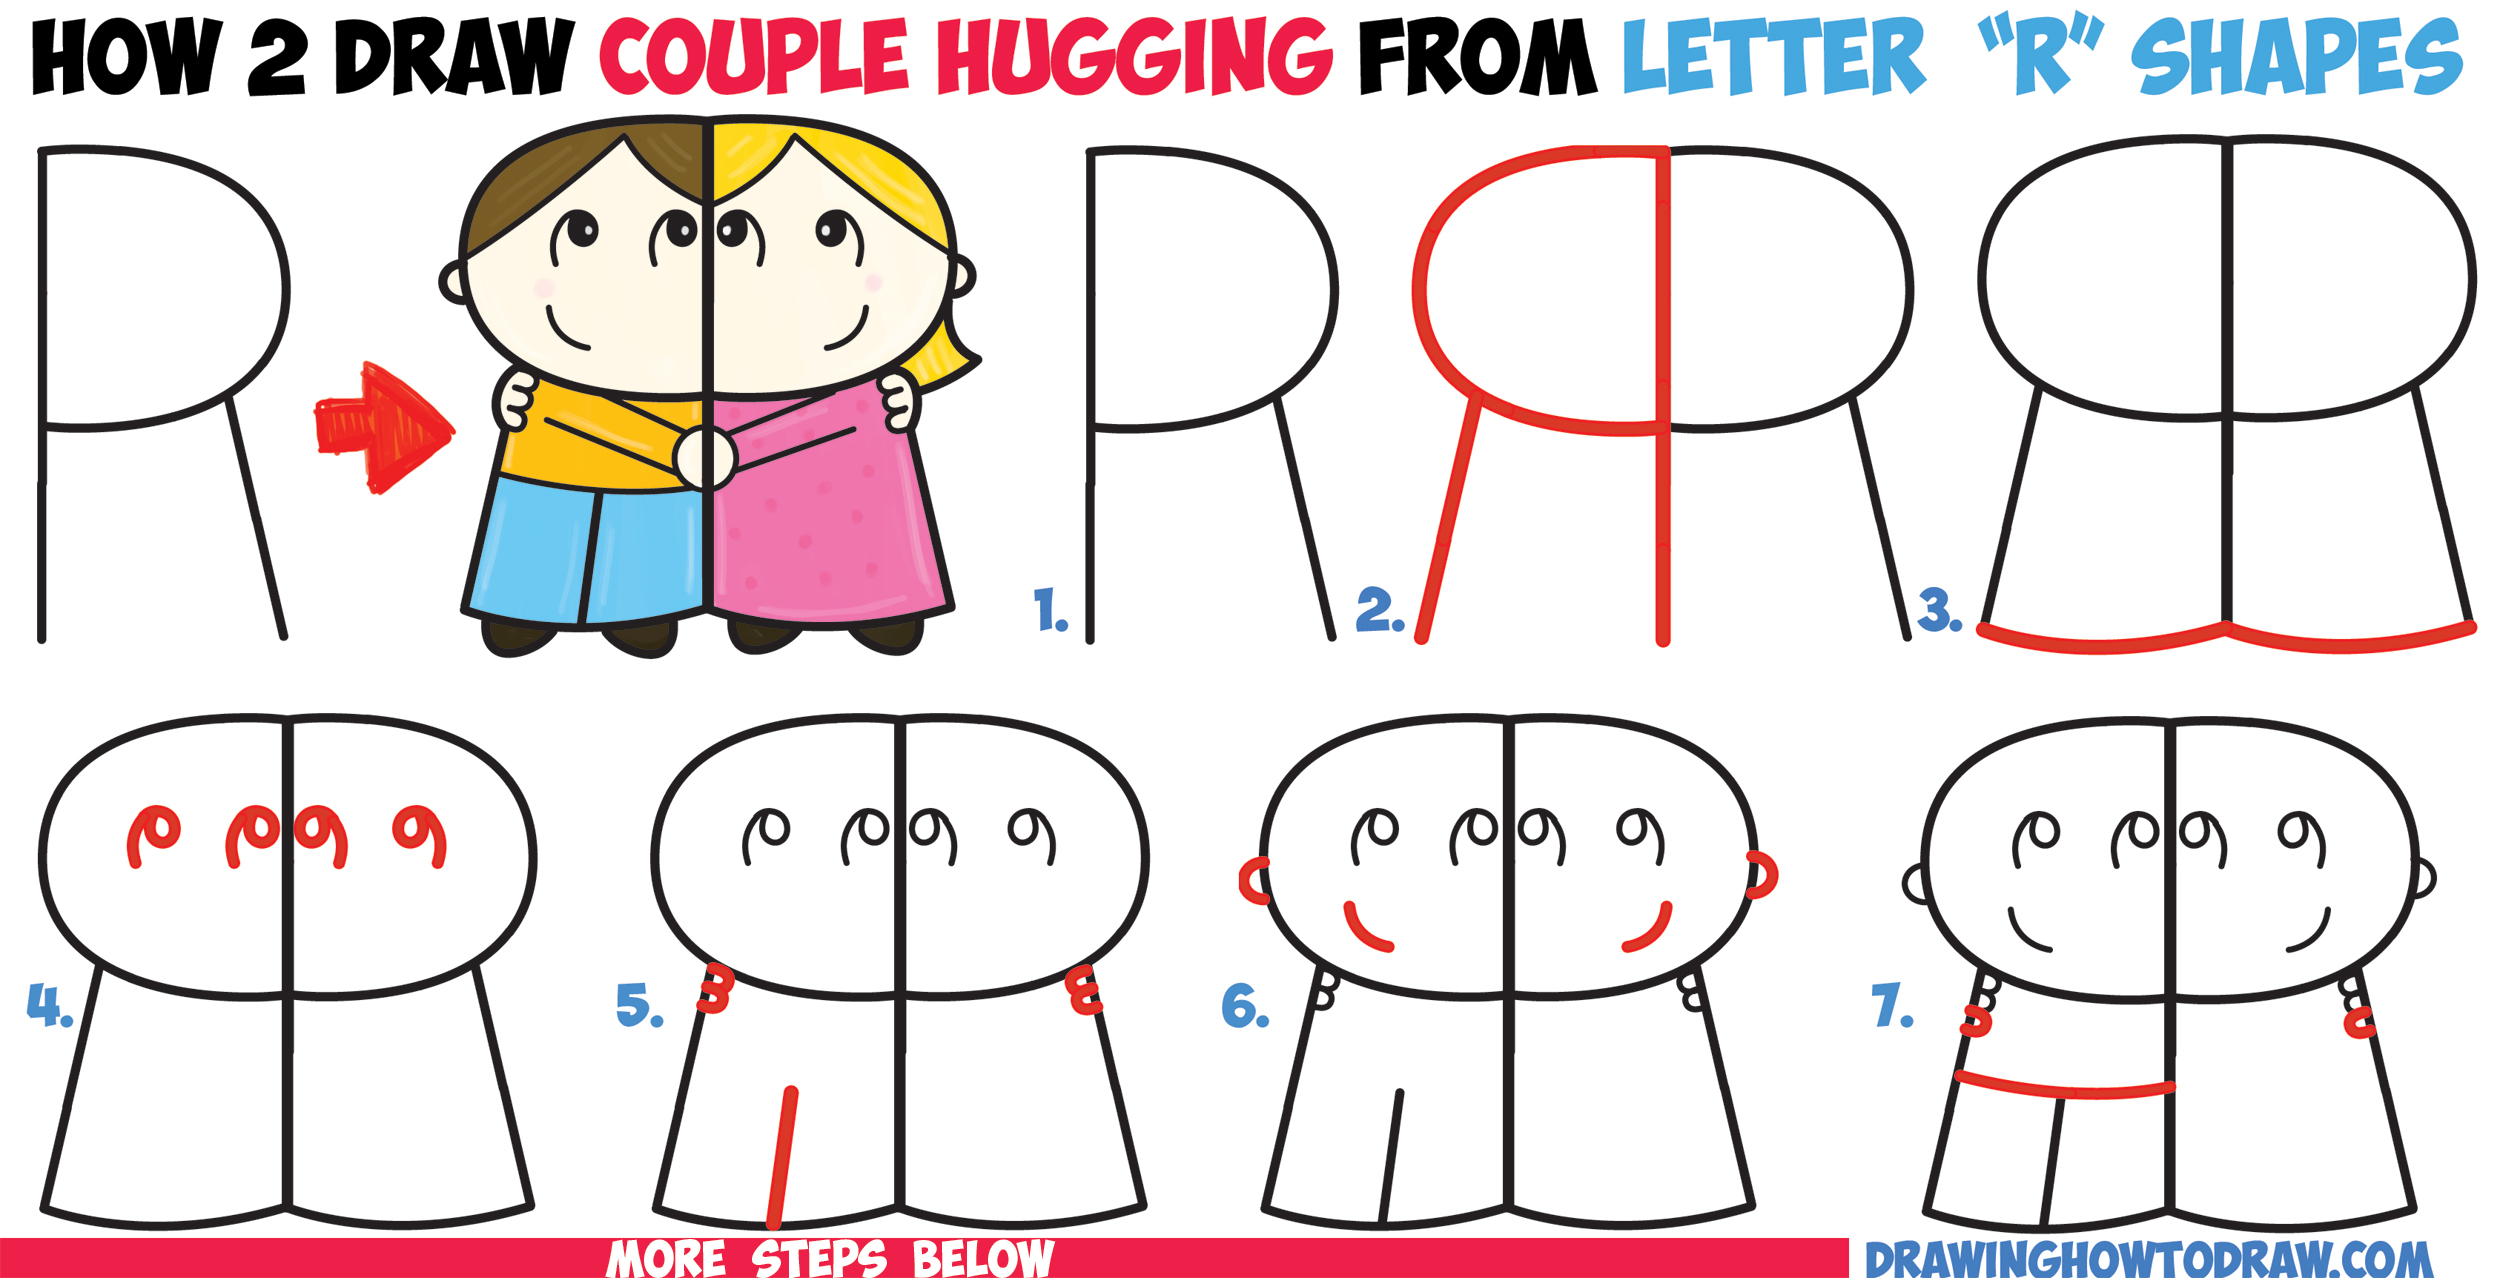 How to Draw Cartoon Couple (Girl and Boy) Hugging from Letter 